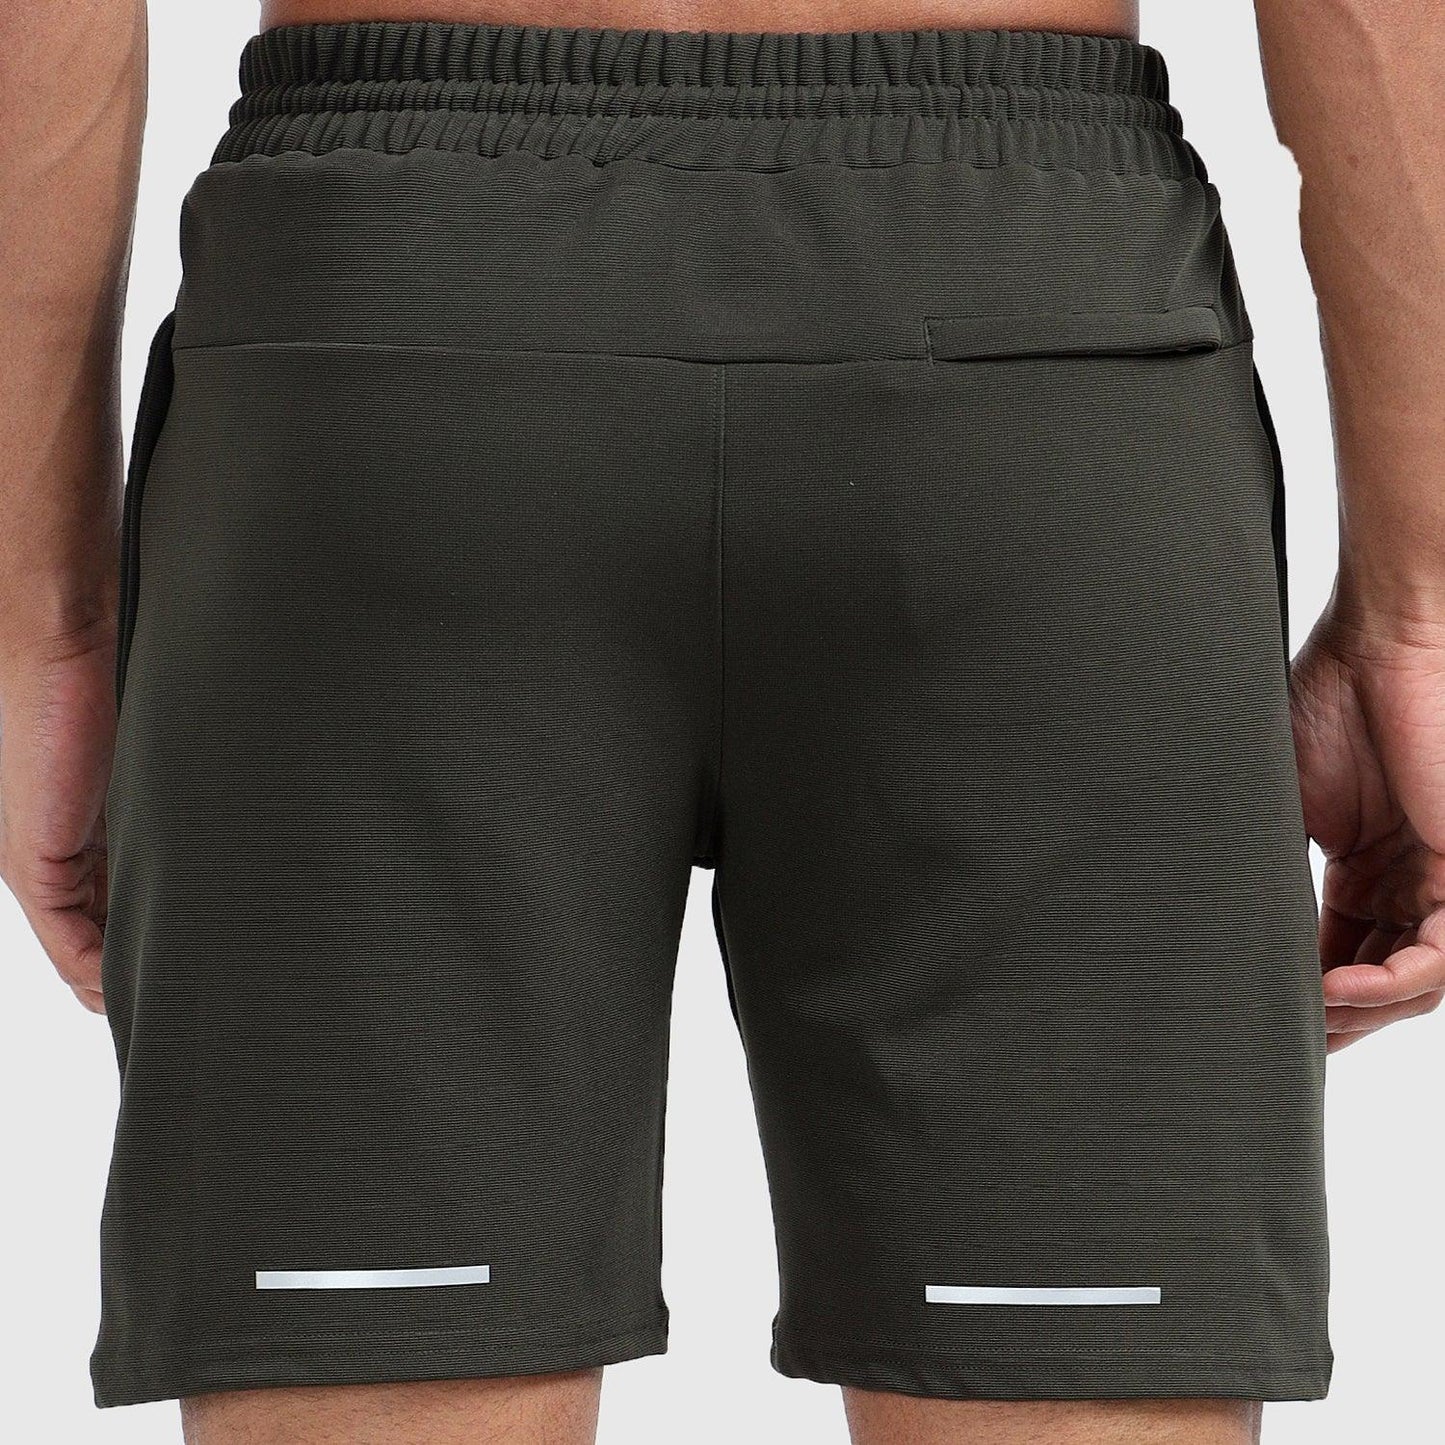 Denmonk's fashionable Trekready core olive shorts for men will boost your level of gym fitness.